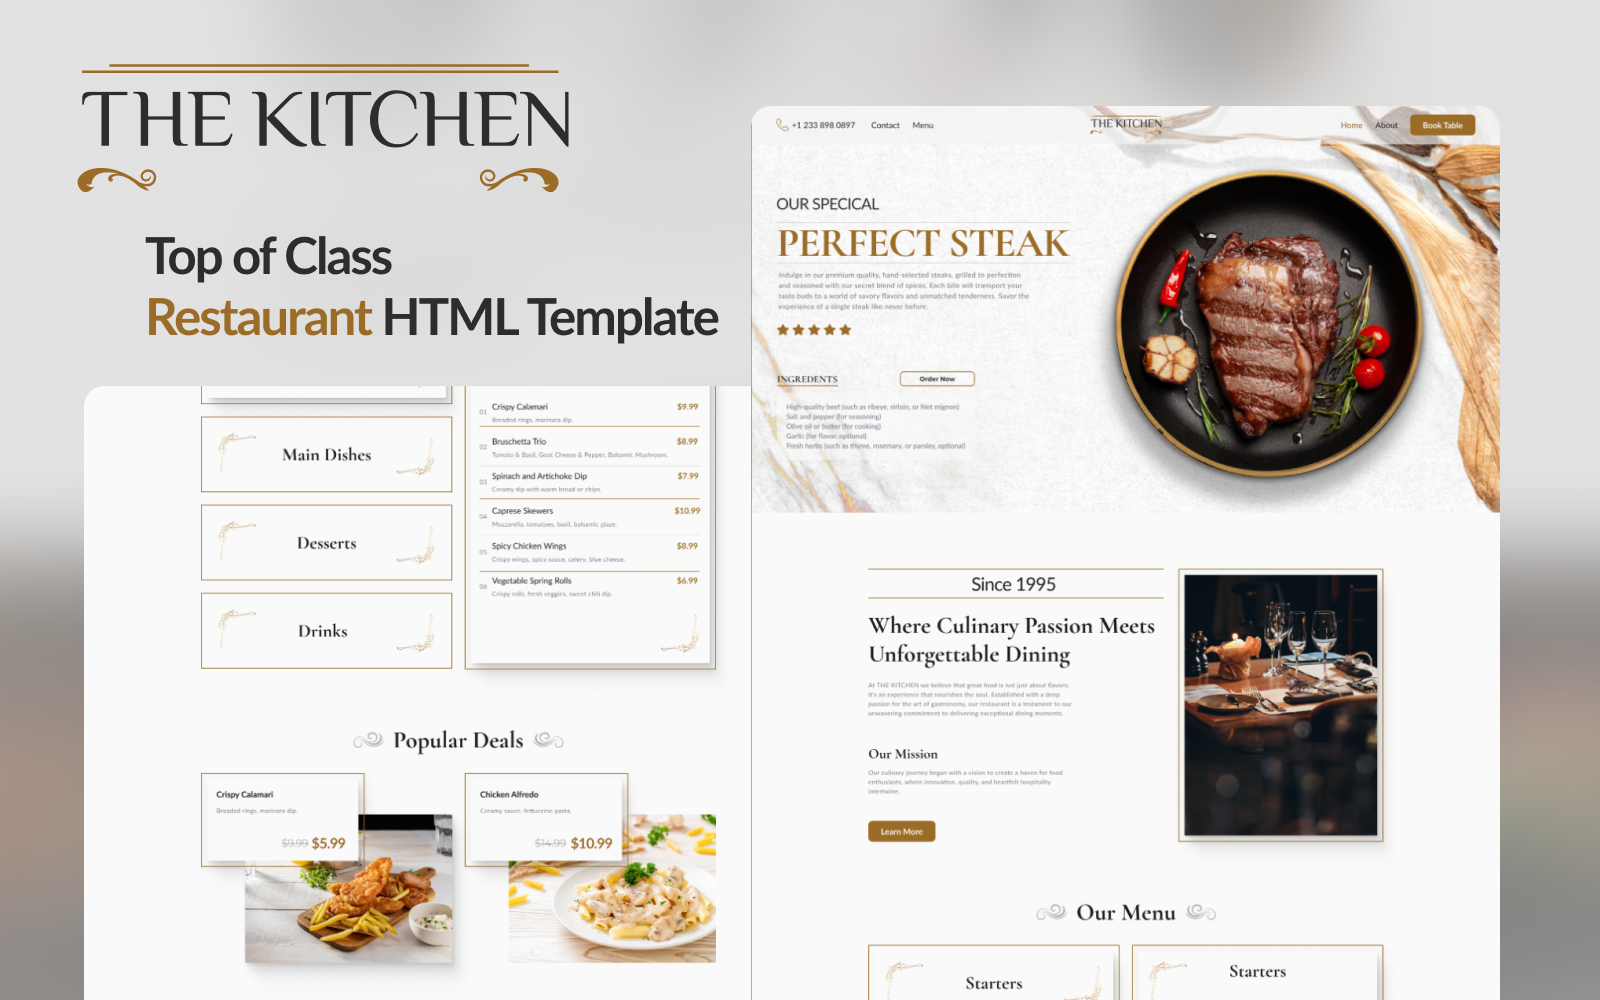 Feast Your Eyes: 'The Kitchen' Restaurant HTML Template for Savory Websites